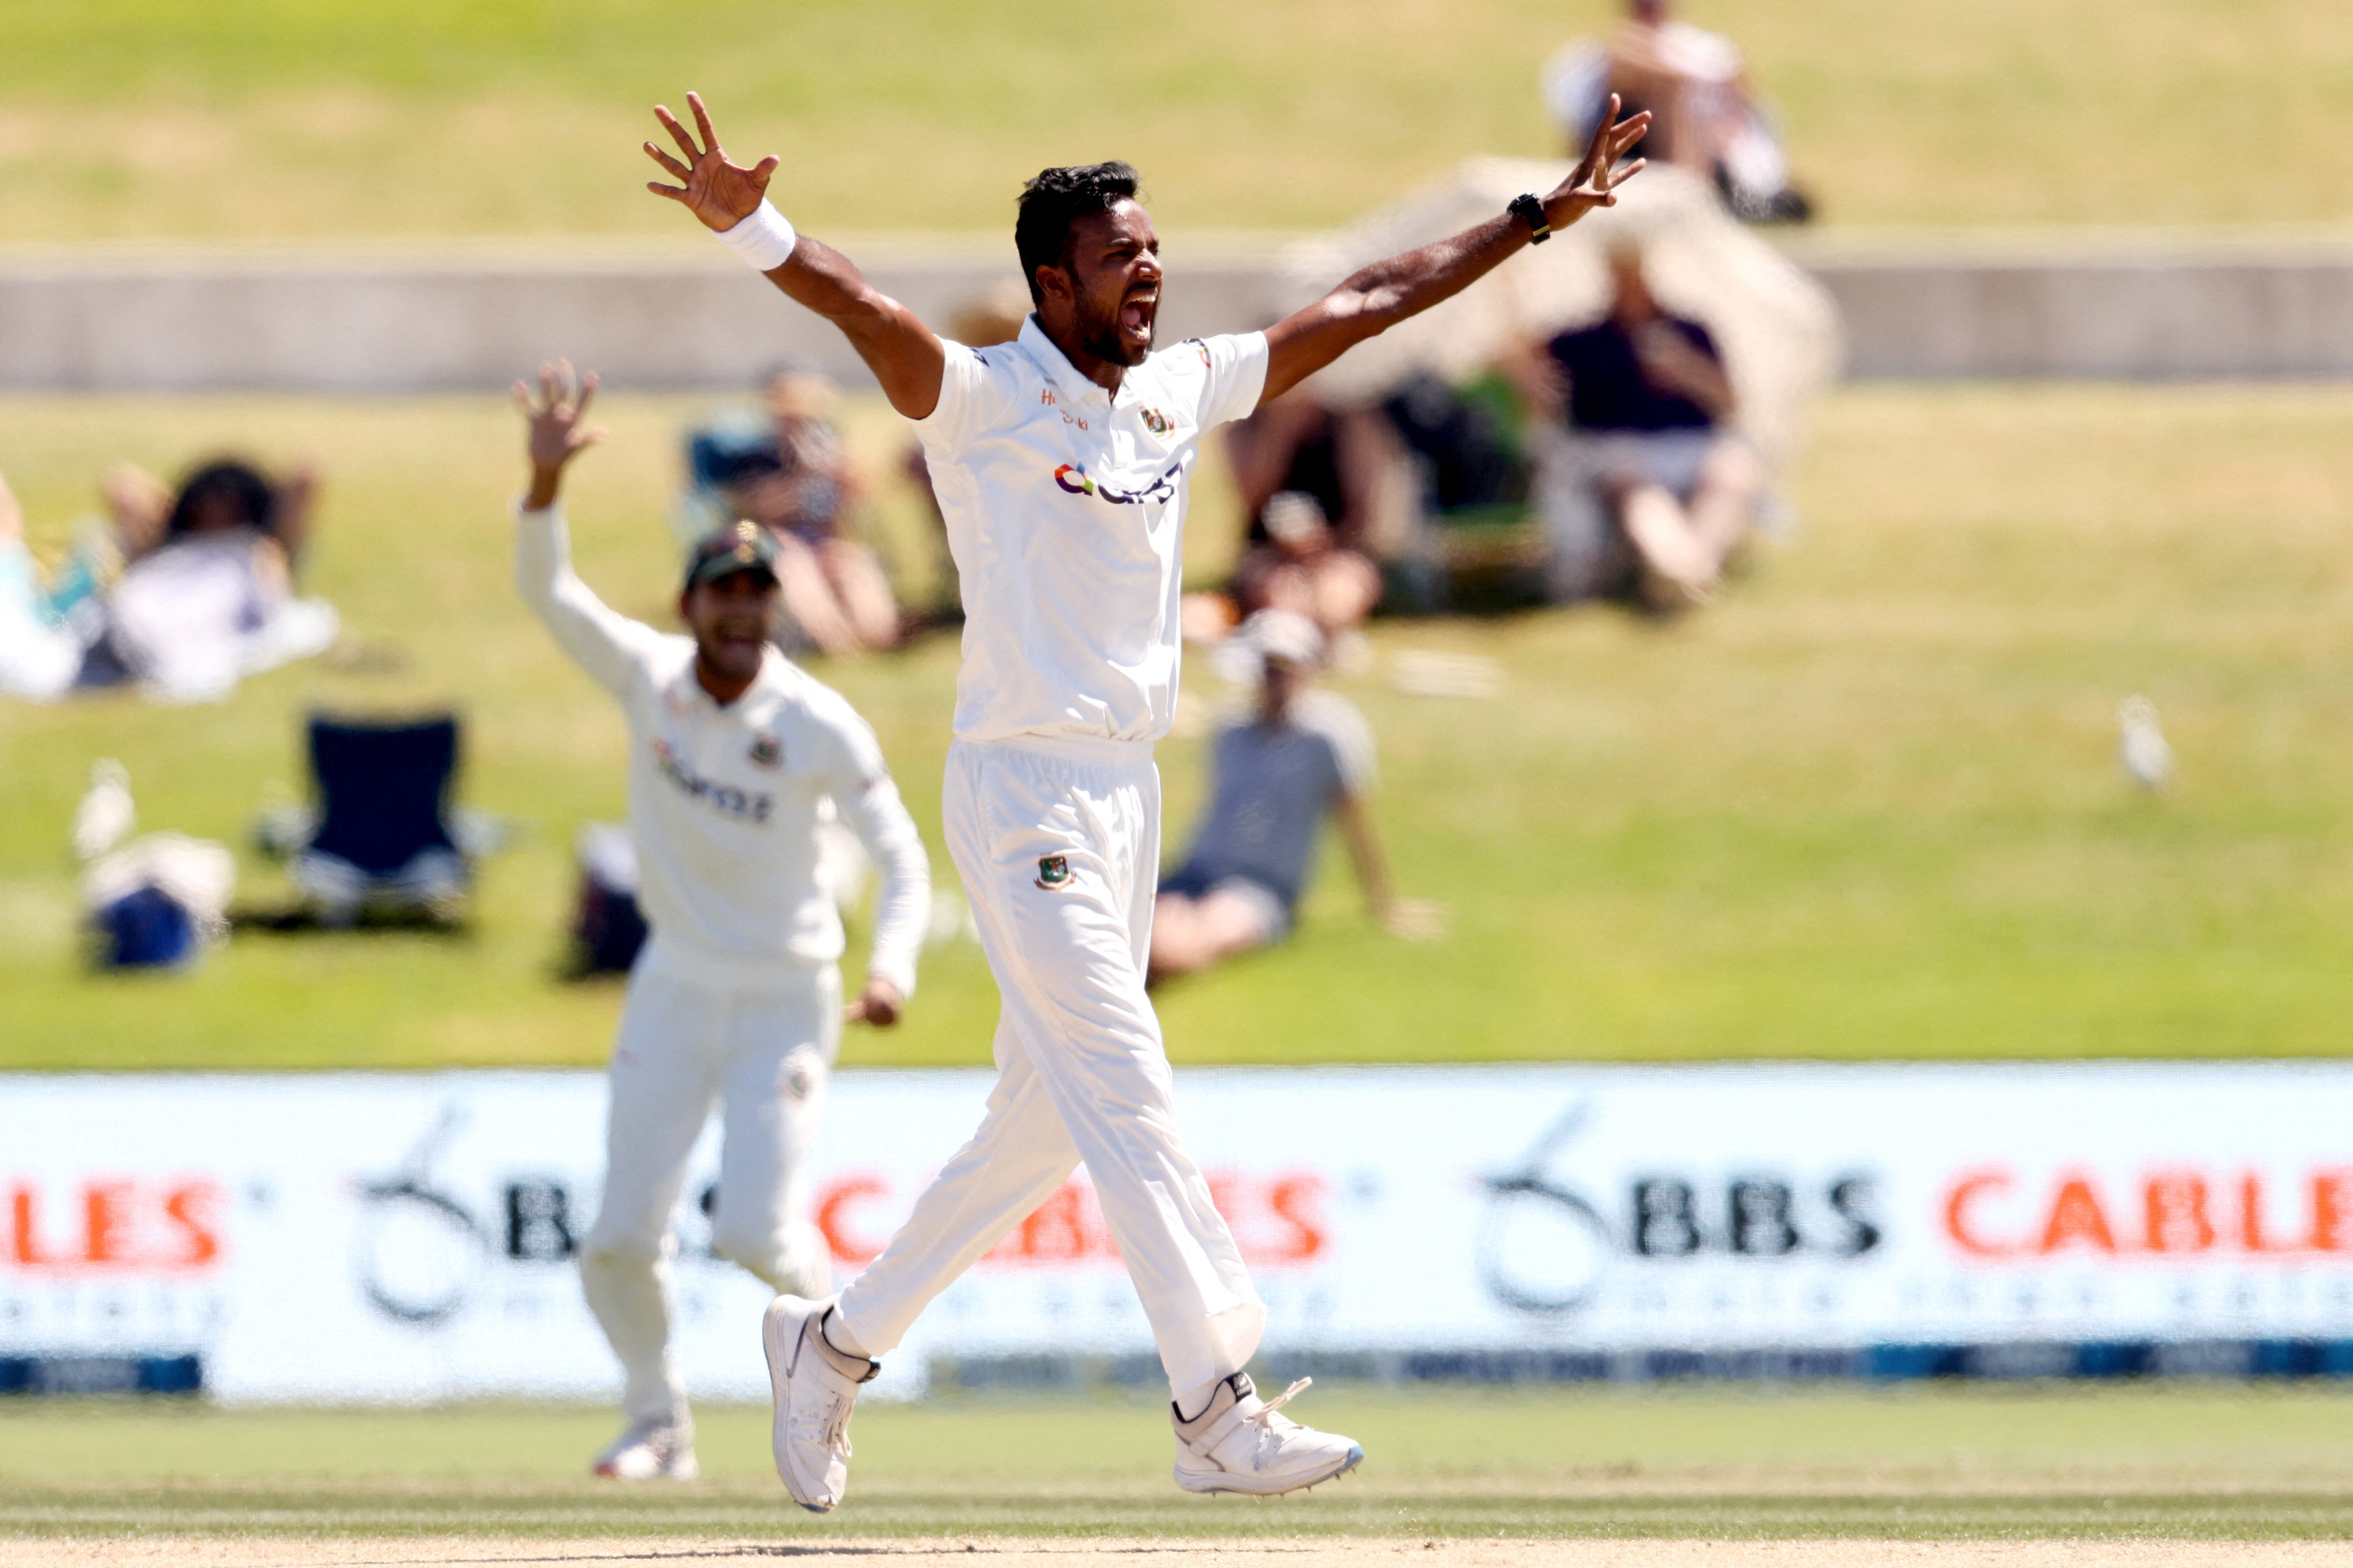 NZ vs BAN | WATCH : Ebadot Hossain concedes seven runs off one delivery